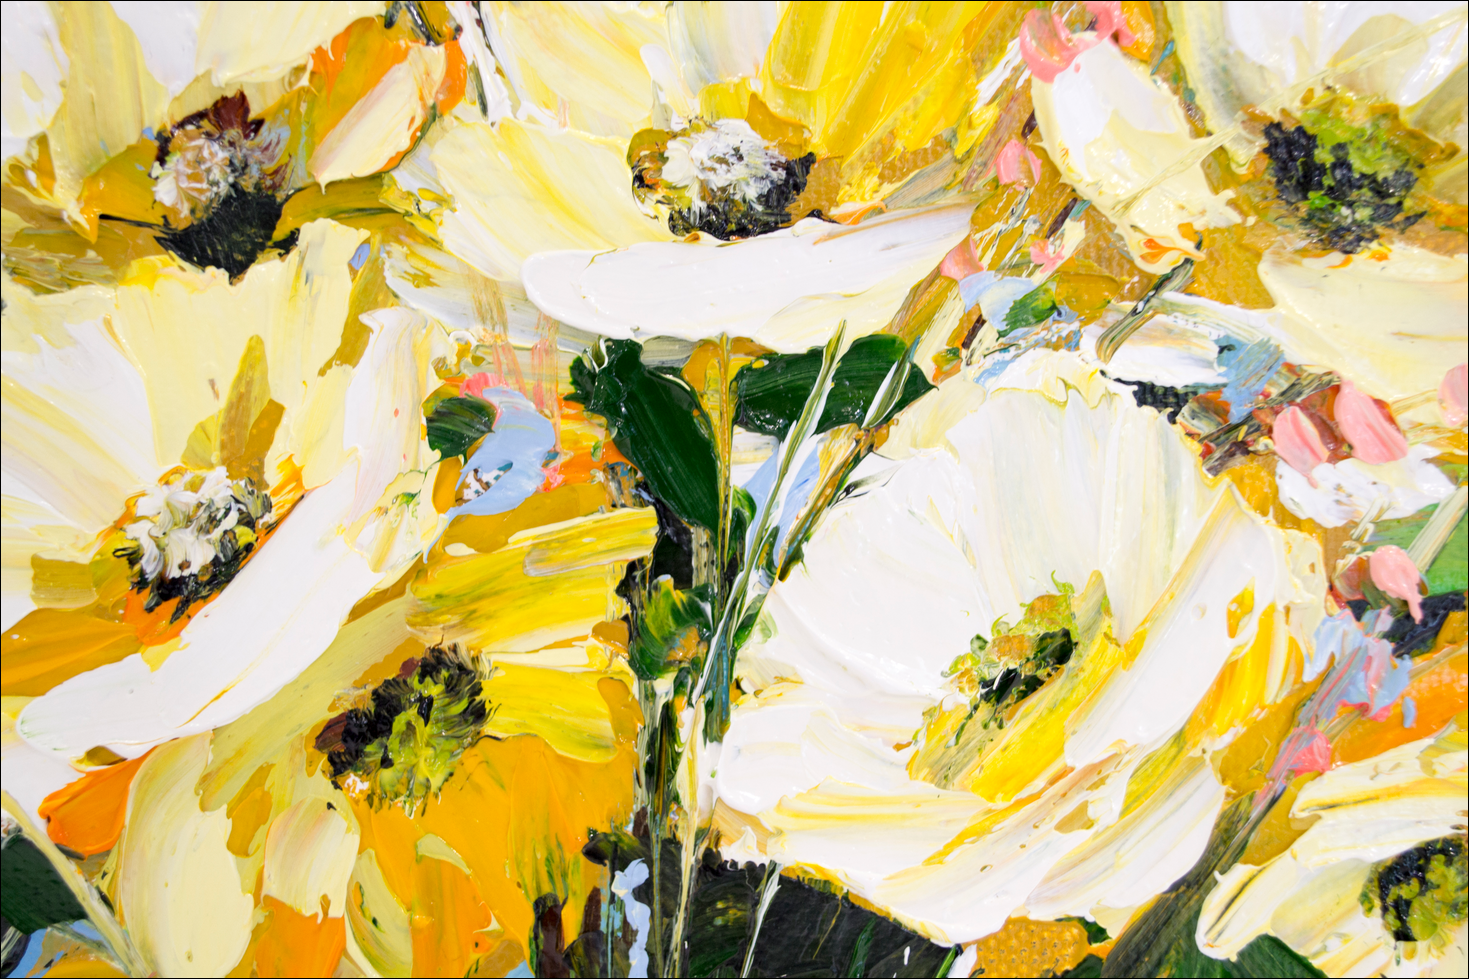 Close Up Detail Of Oil Painting "Yellow Blossom" By Judith Dalozzo